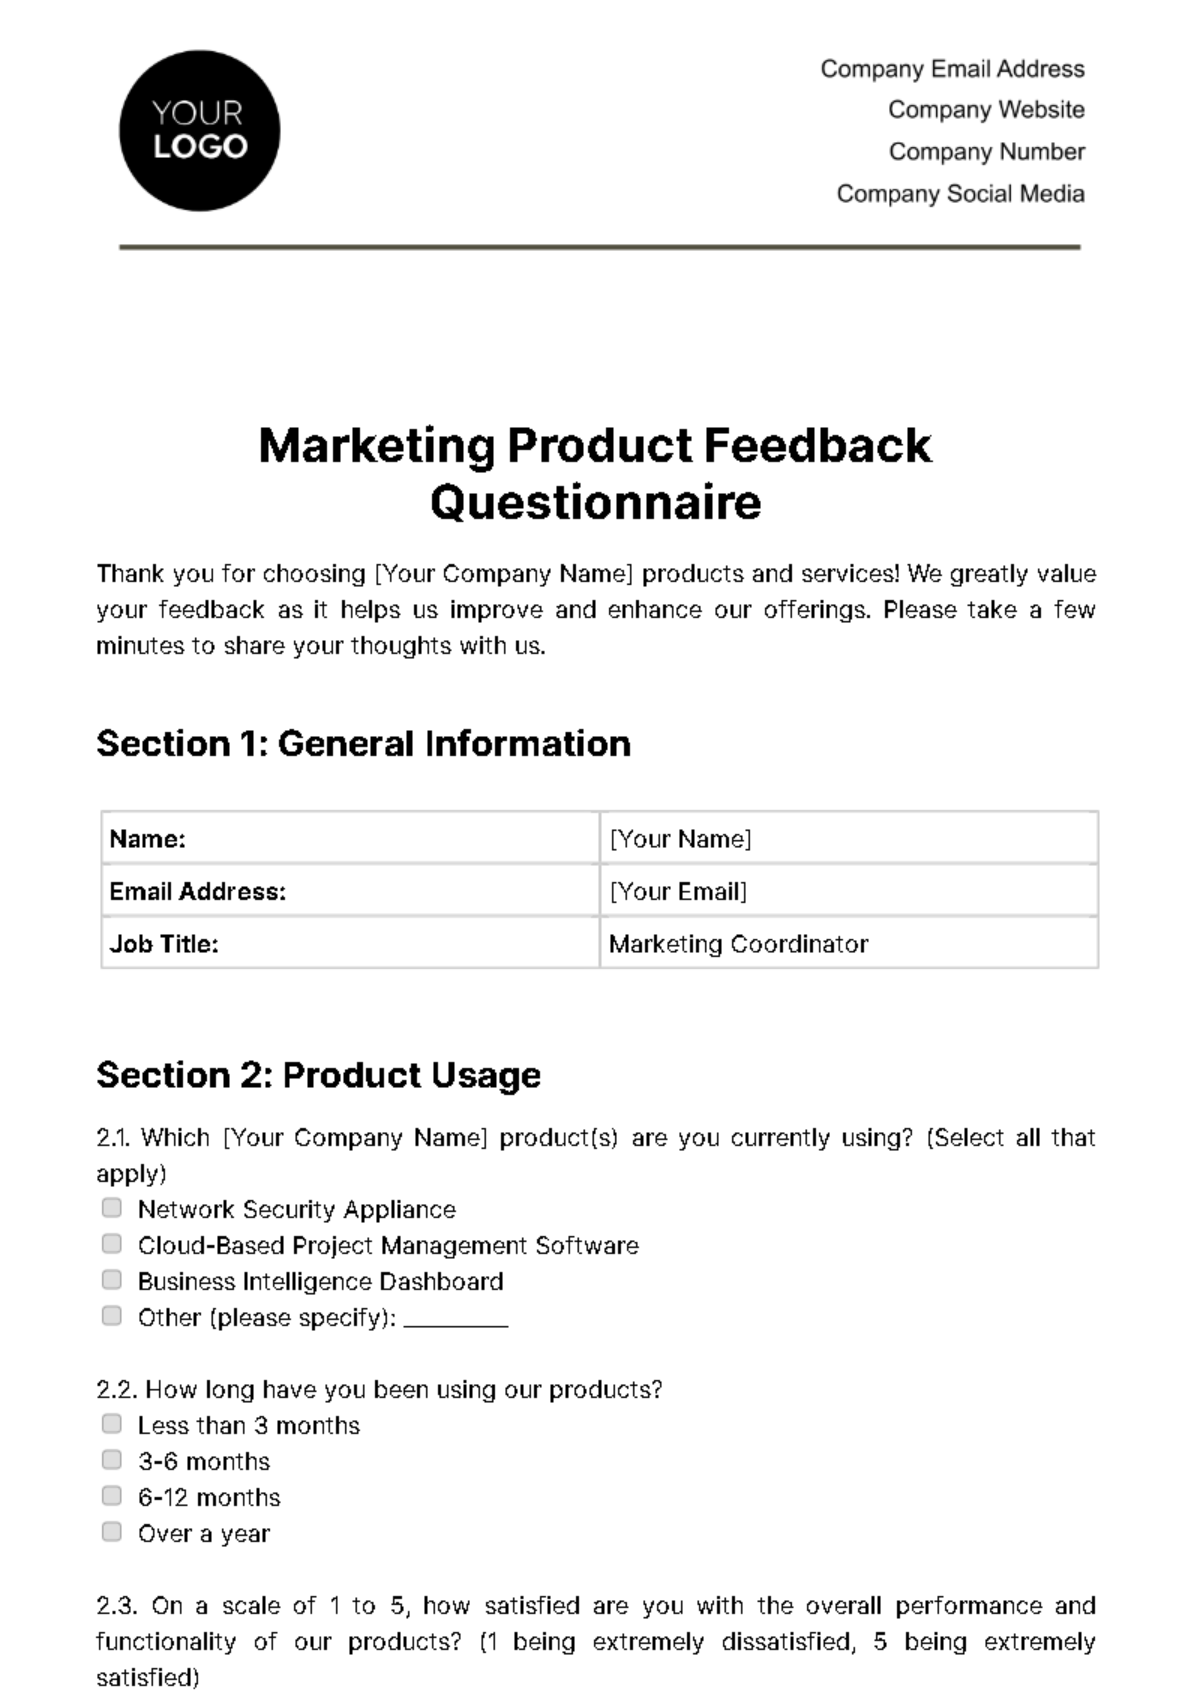 Free Marketing Product Feedback Questionnaire Template